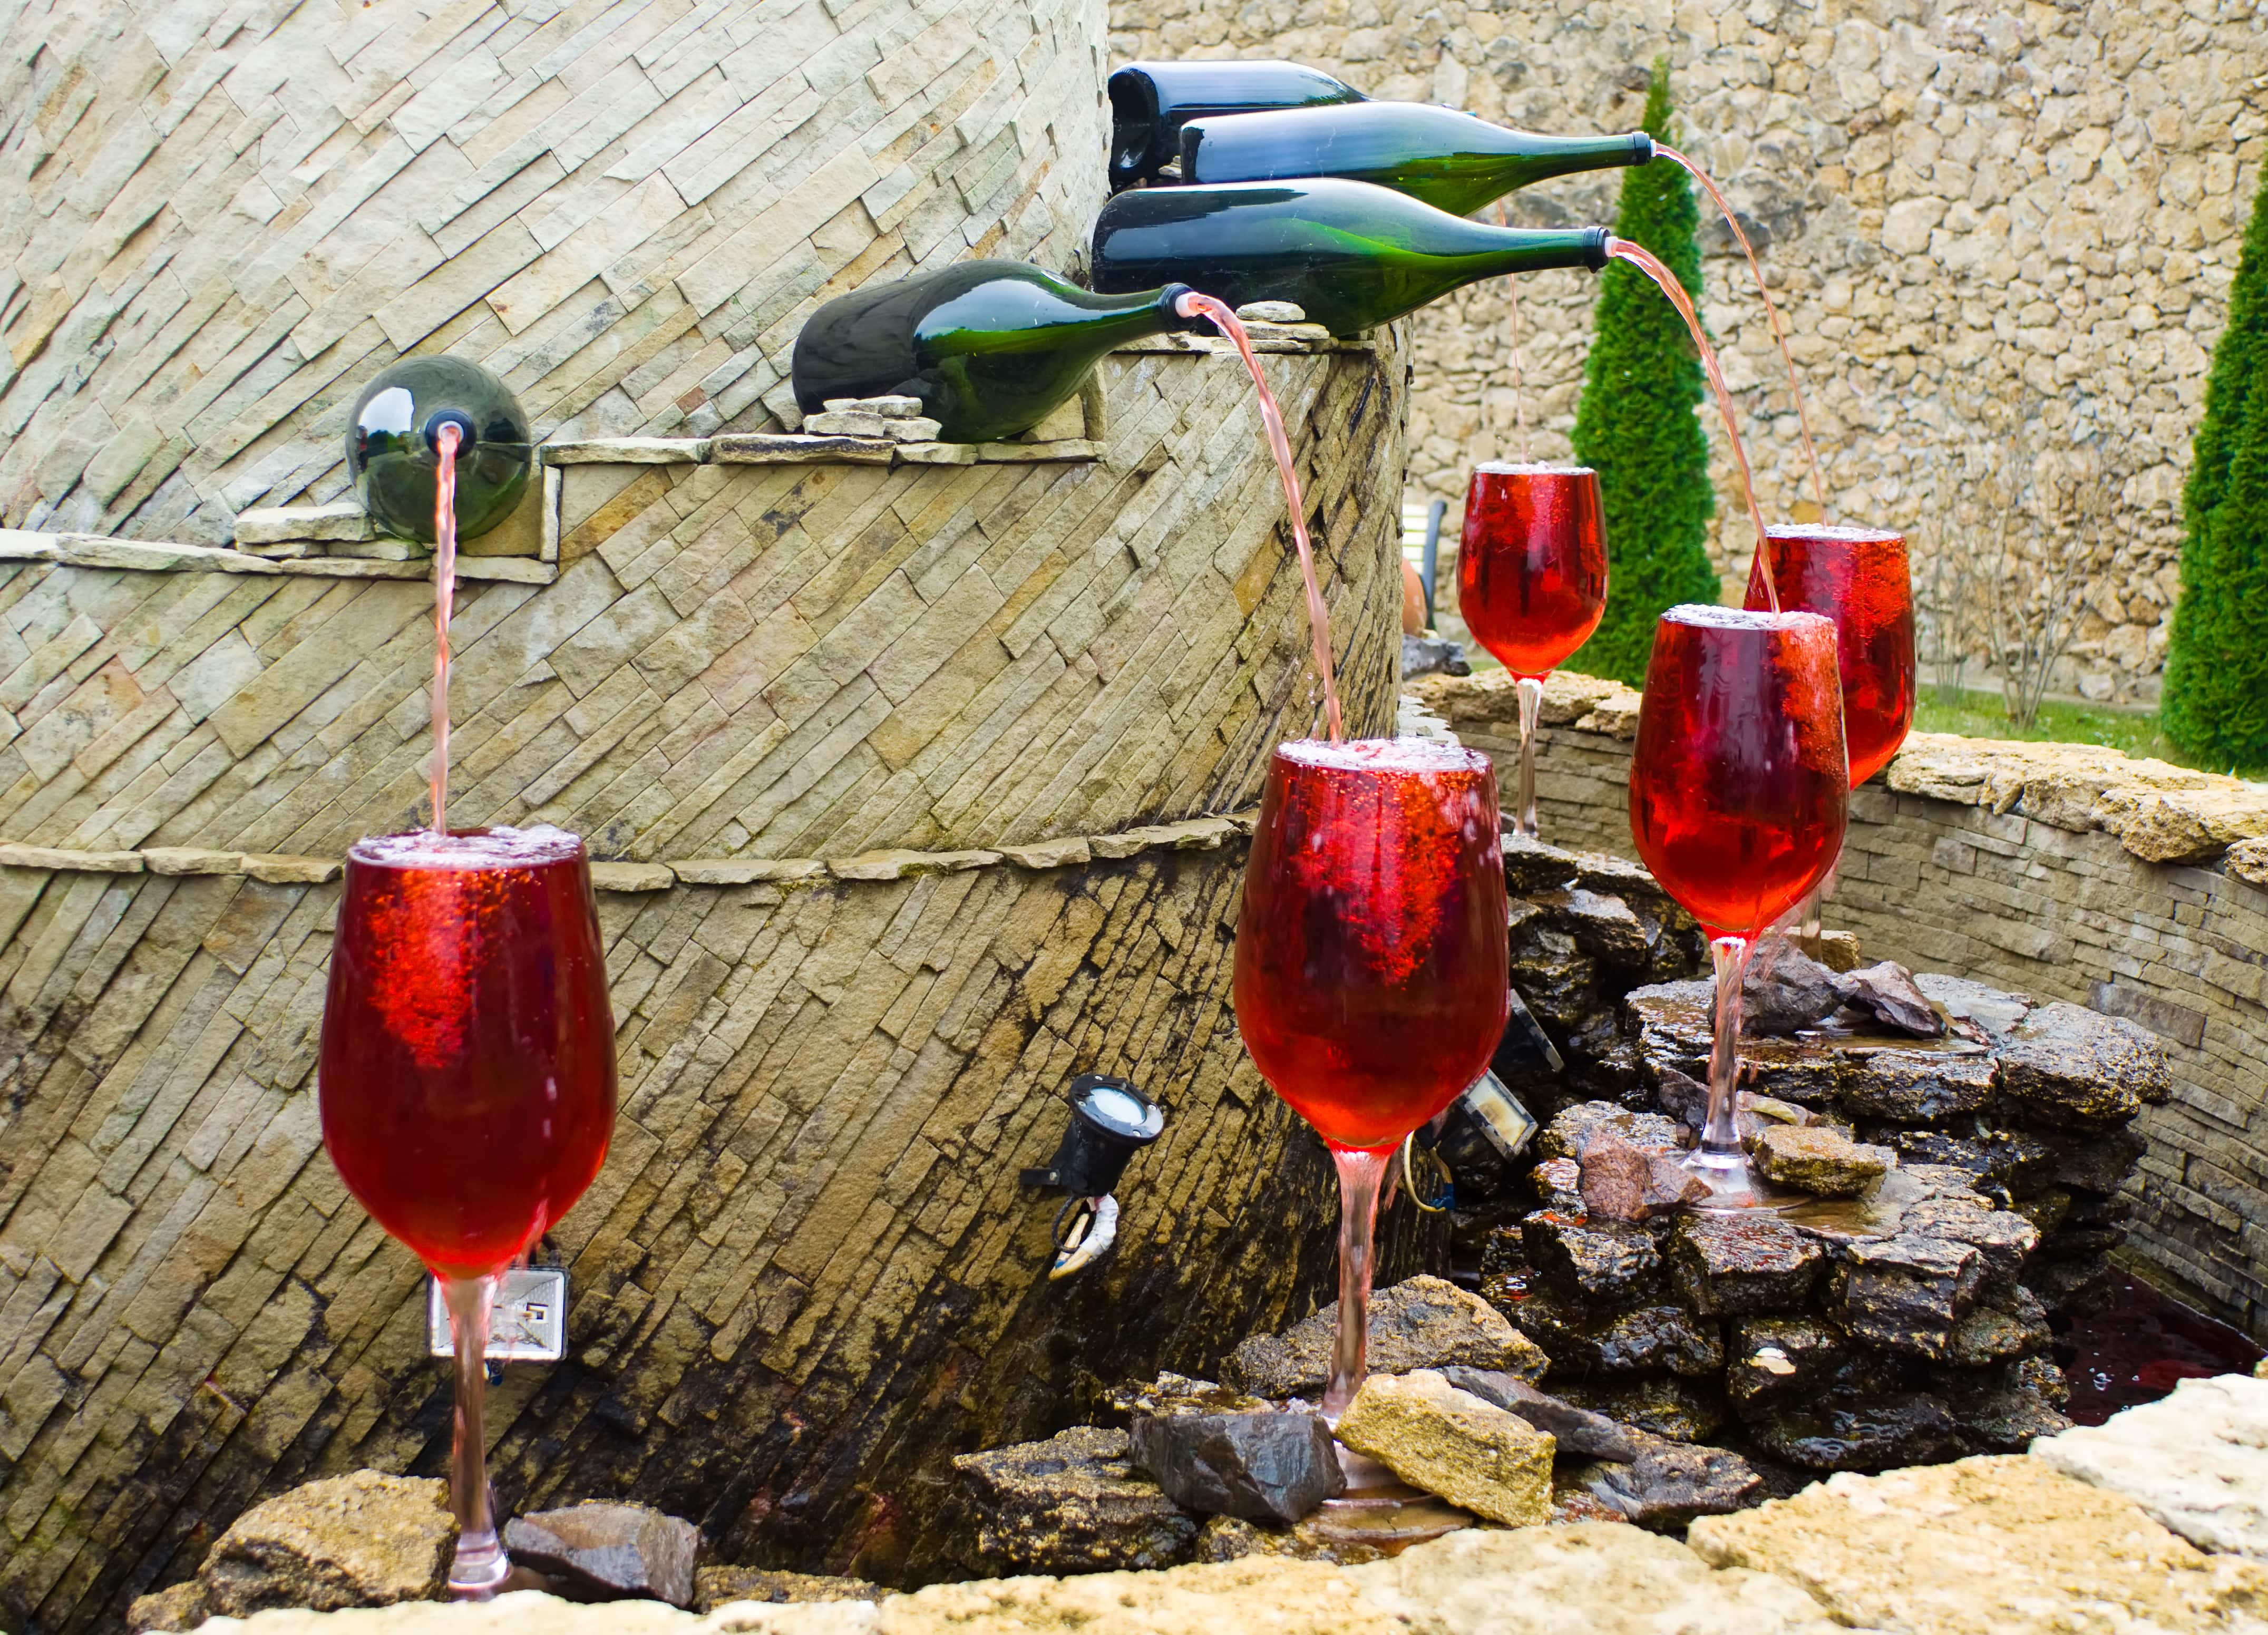 Free wine drinking fountain in Italy